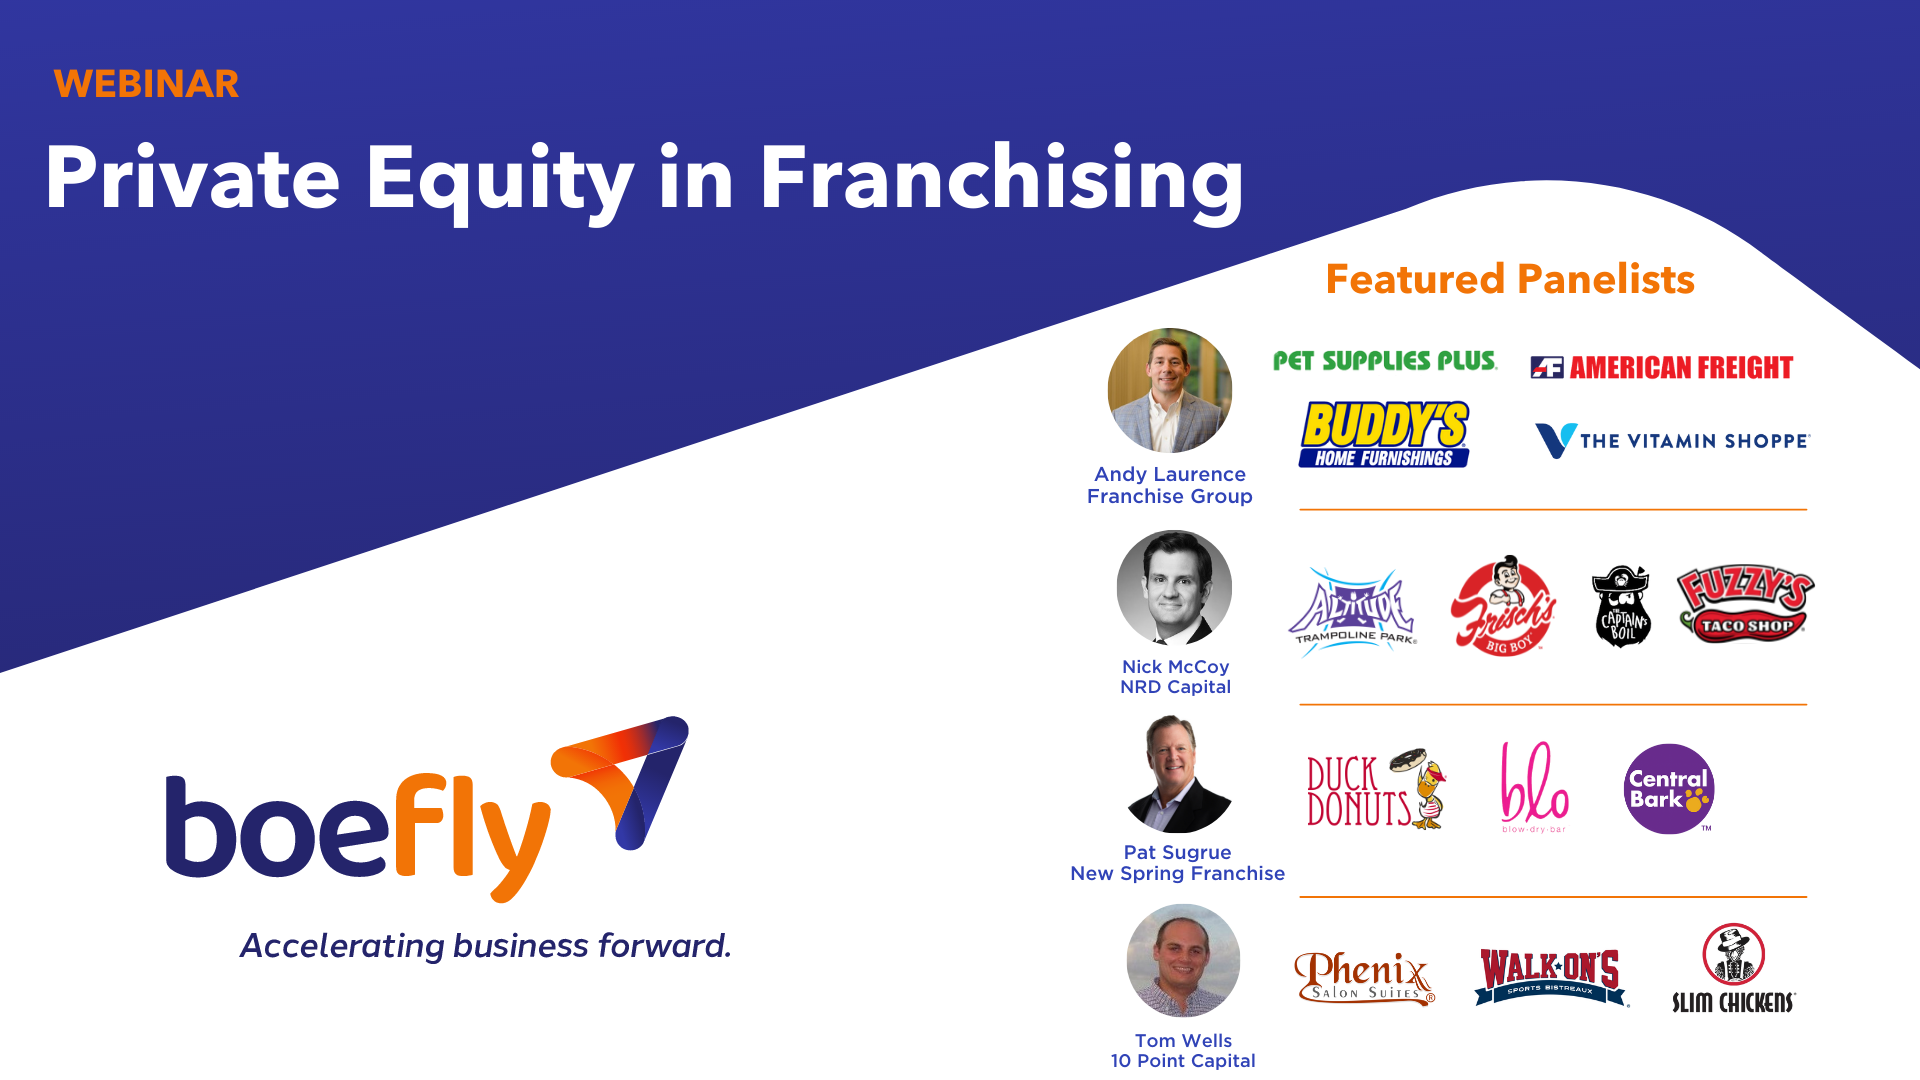 Private Equity in Franchising with images of the panelists and their brands.